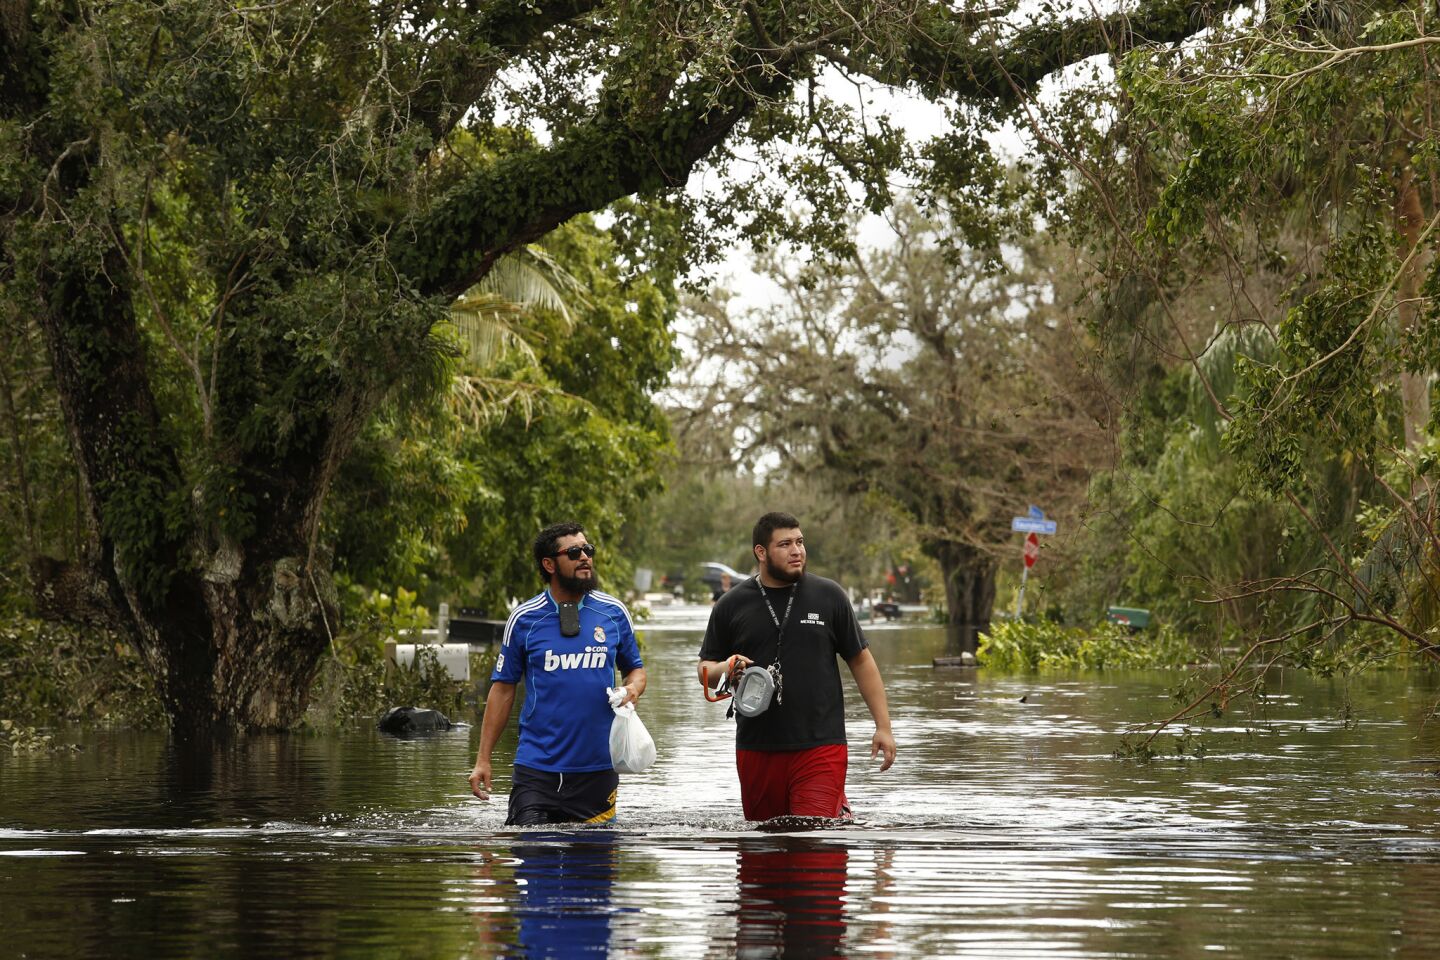 In Bonita Springs, floodwaters reached waist deep in some areas on Monday, flooding homes and cars.